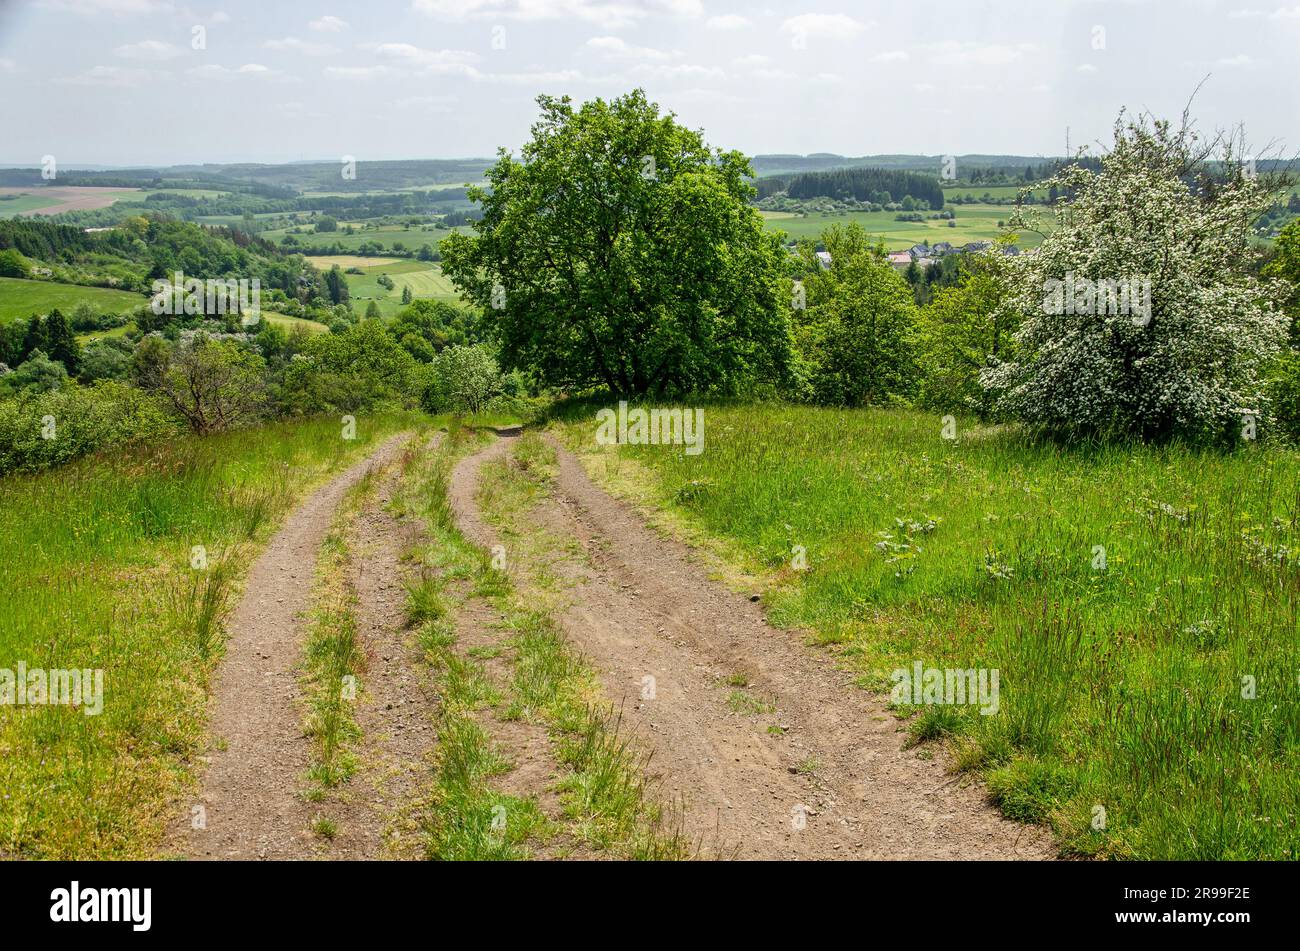 Dirt road leading down with a magnificanet view of the Eifel mountains near the volcanic lakes of Daun, Germany Stock Photo